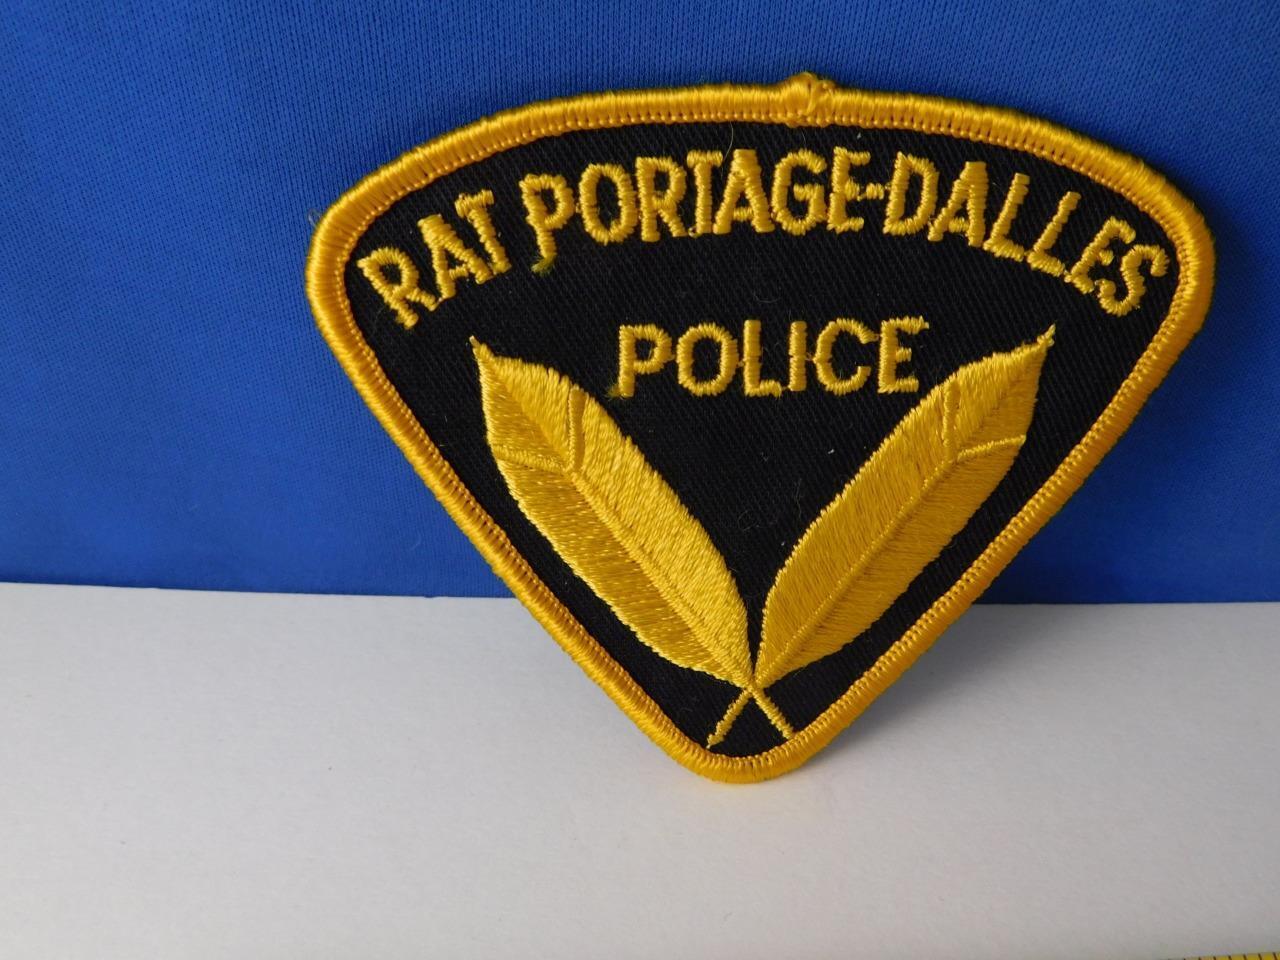 Rat Portage Dalles First Nations Police Vintage Patch Badge Native Ontario